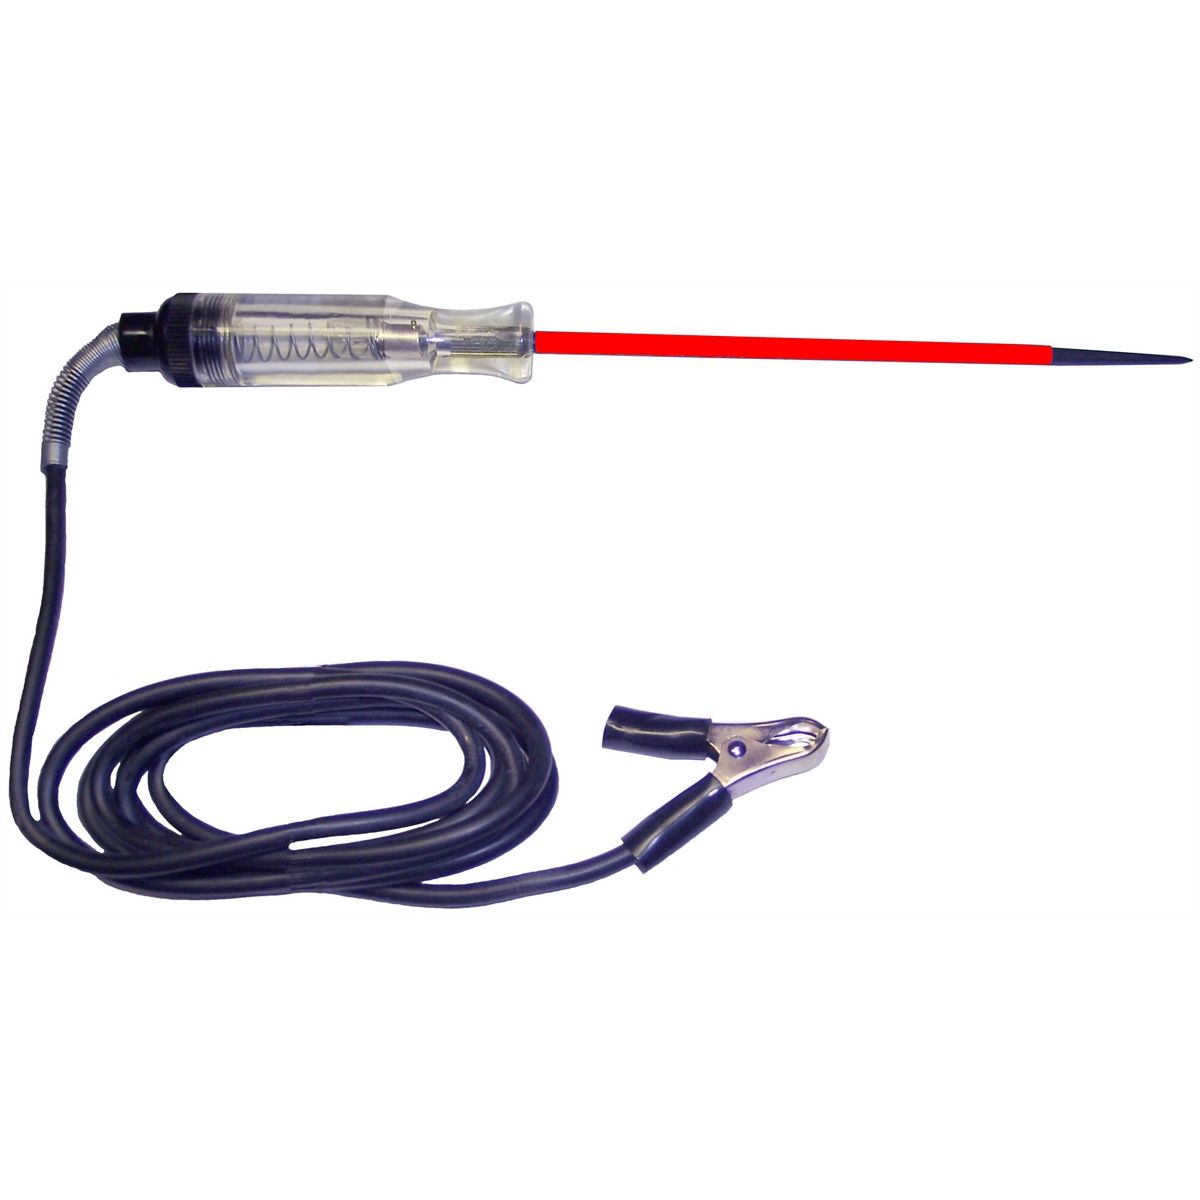 Circuit Tester - Heavy Duty & Extra Long - Red Probe